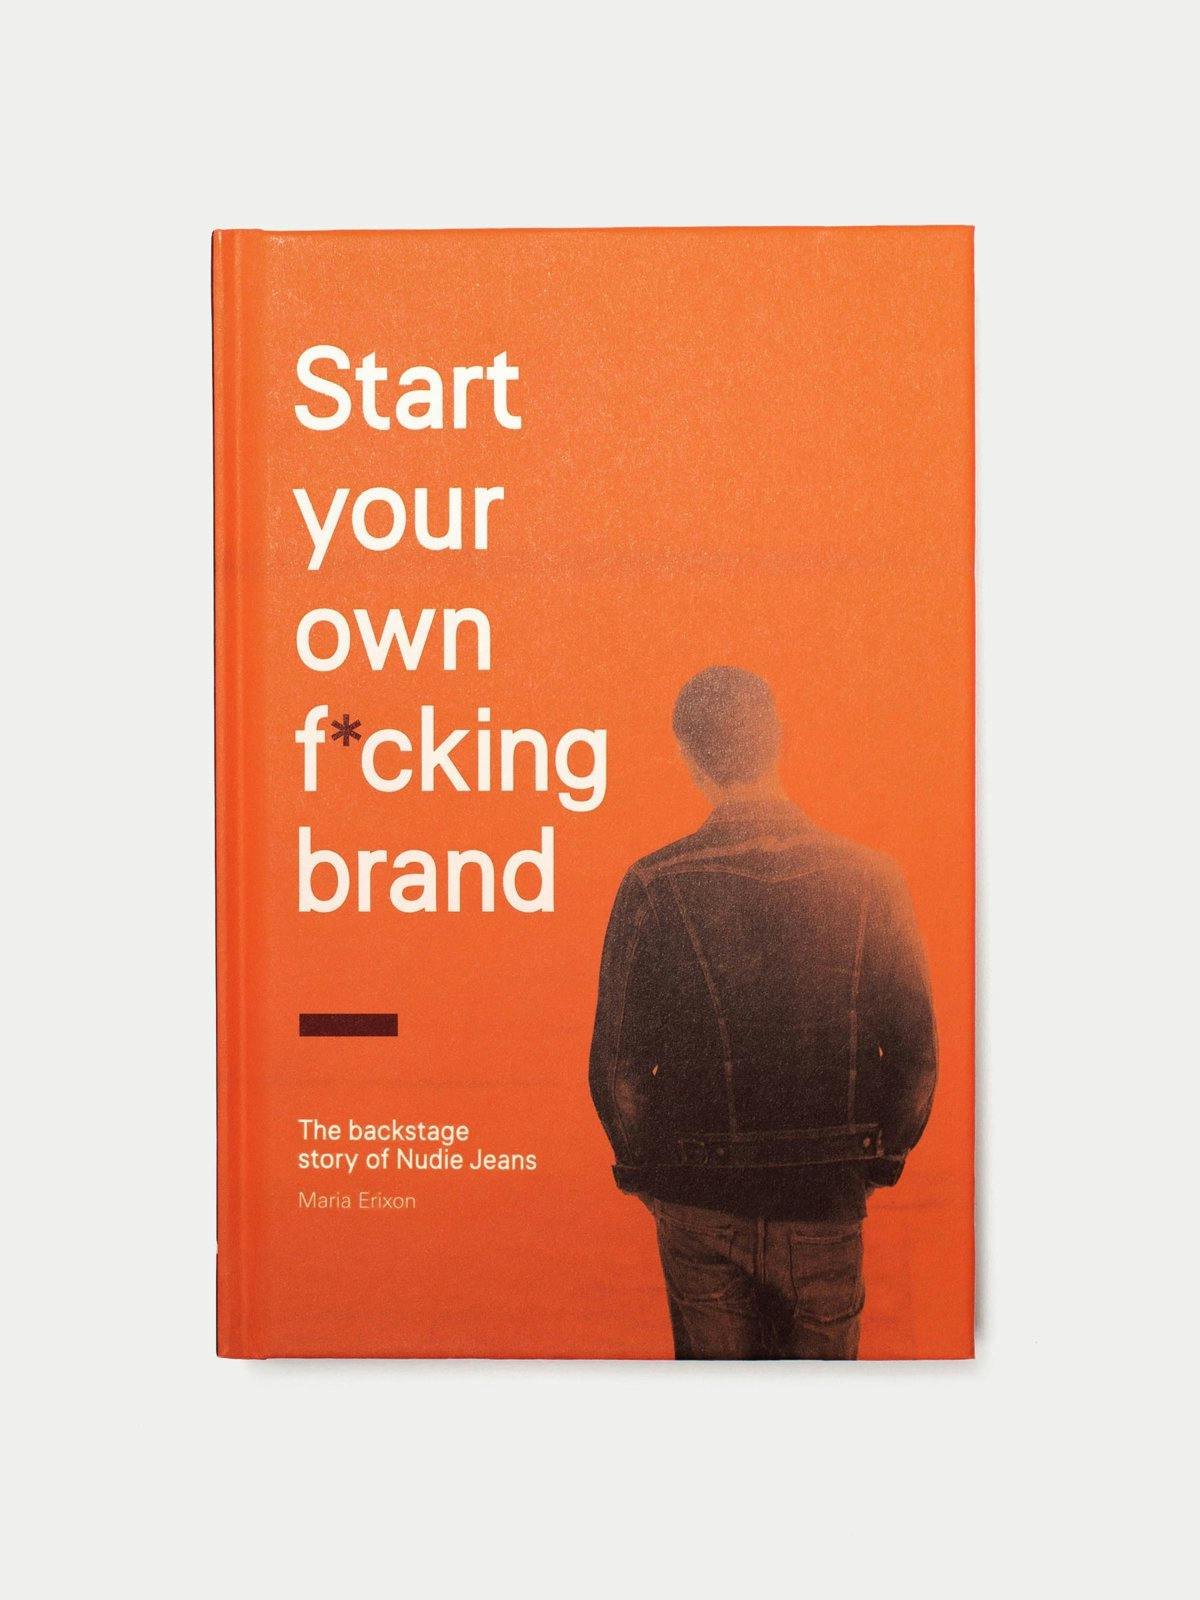 Start-your-own-f-cking-brand-01 szmYkPc 1600x1600